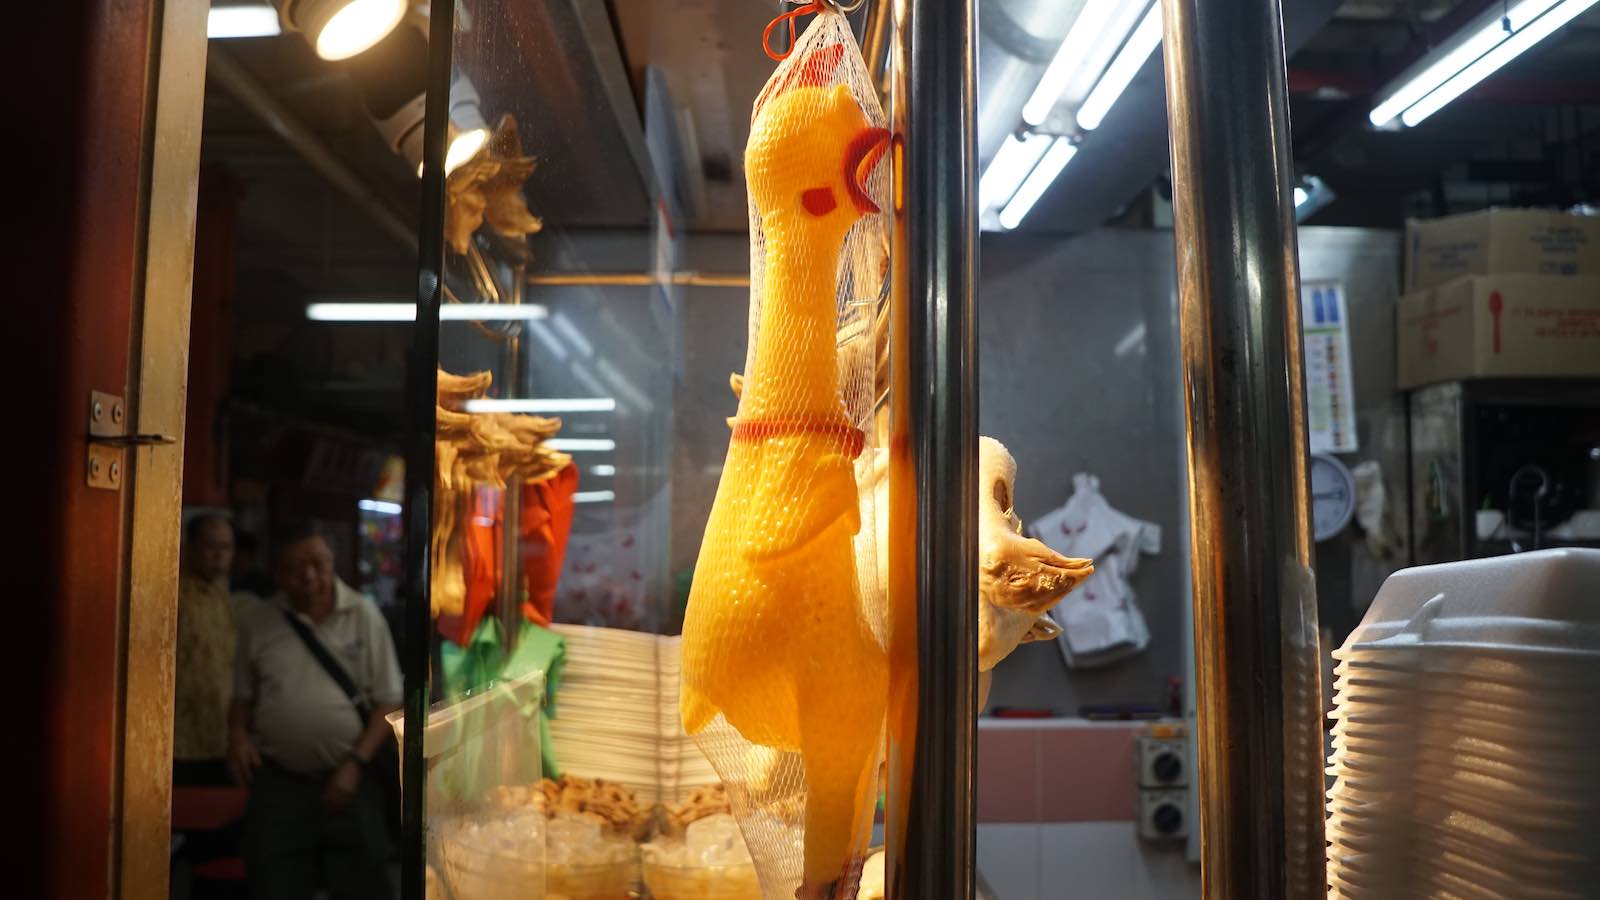 A picture here seems nice to break up the wall of text. I didn't want to find some boring stock image to try and fit the vibe of this article, so instead here's a rubber chicken that I saw trying to fit in with the other real chickens being cooked at a hawker stall in Singapore.